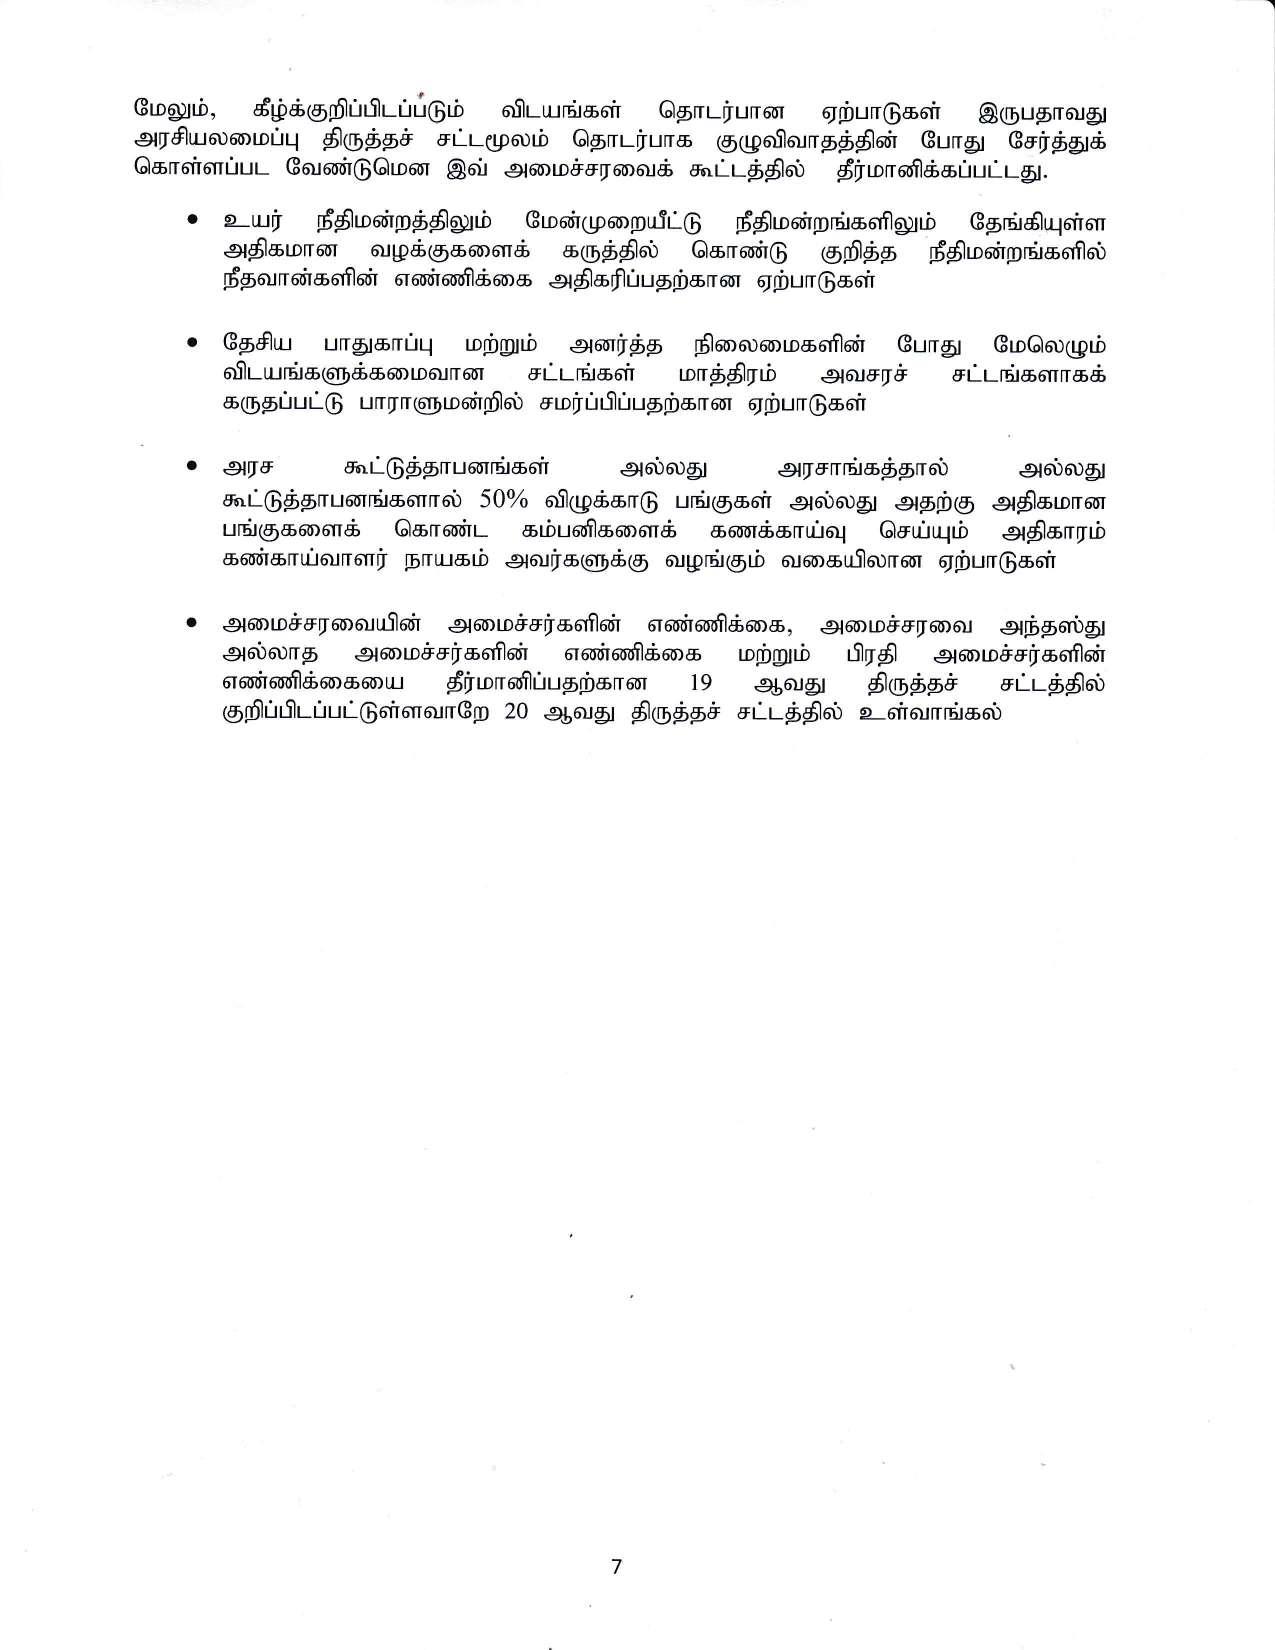 Cabinet Decision on 19.10.2020 Tamil compressed page 007